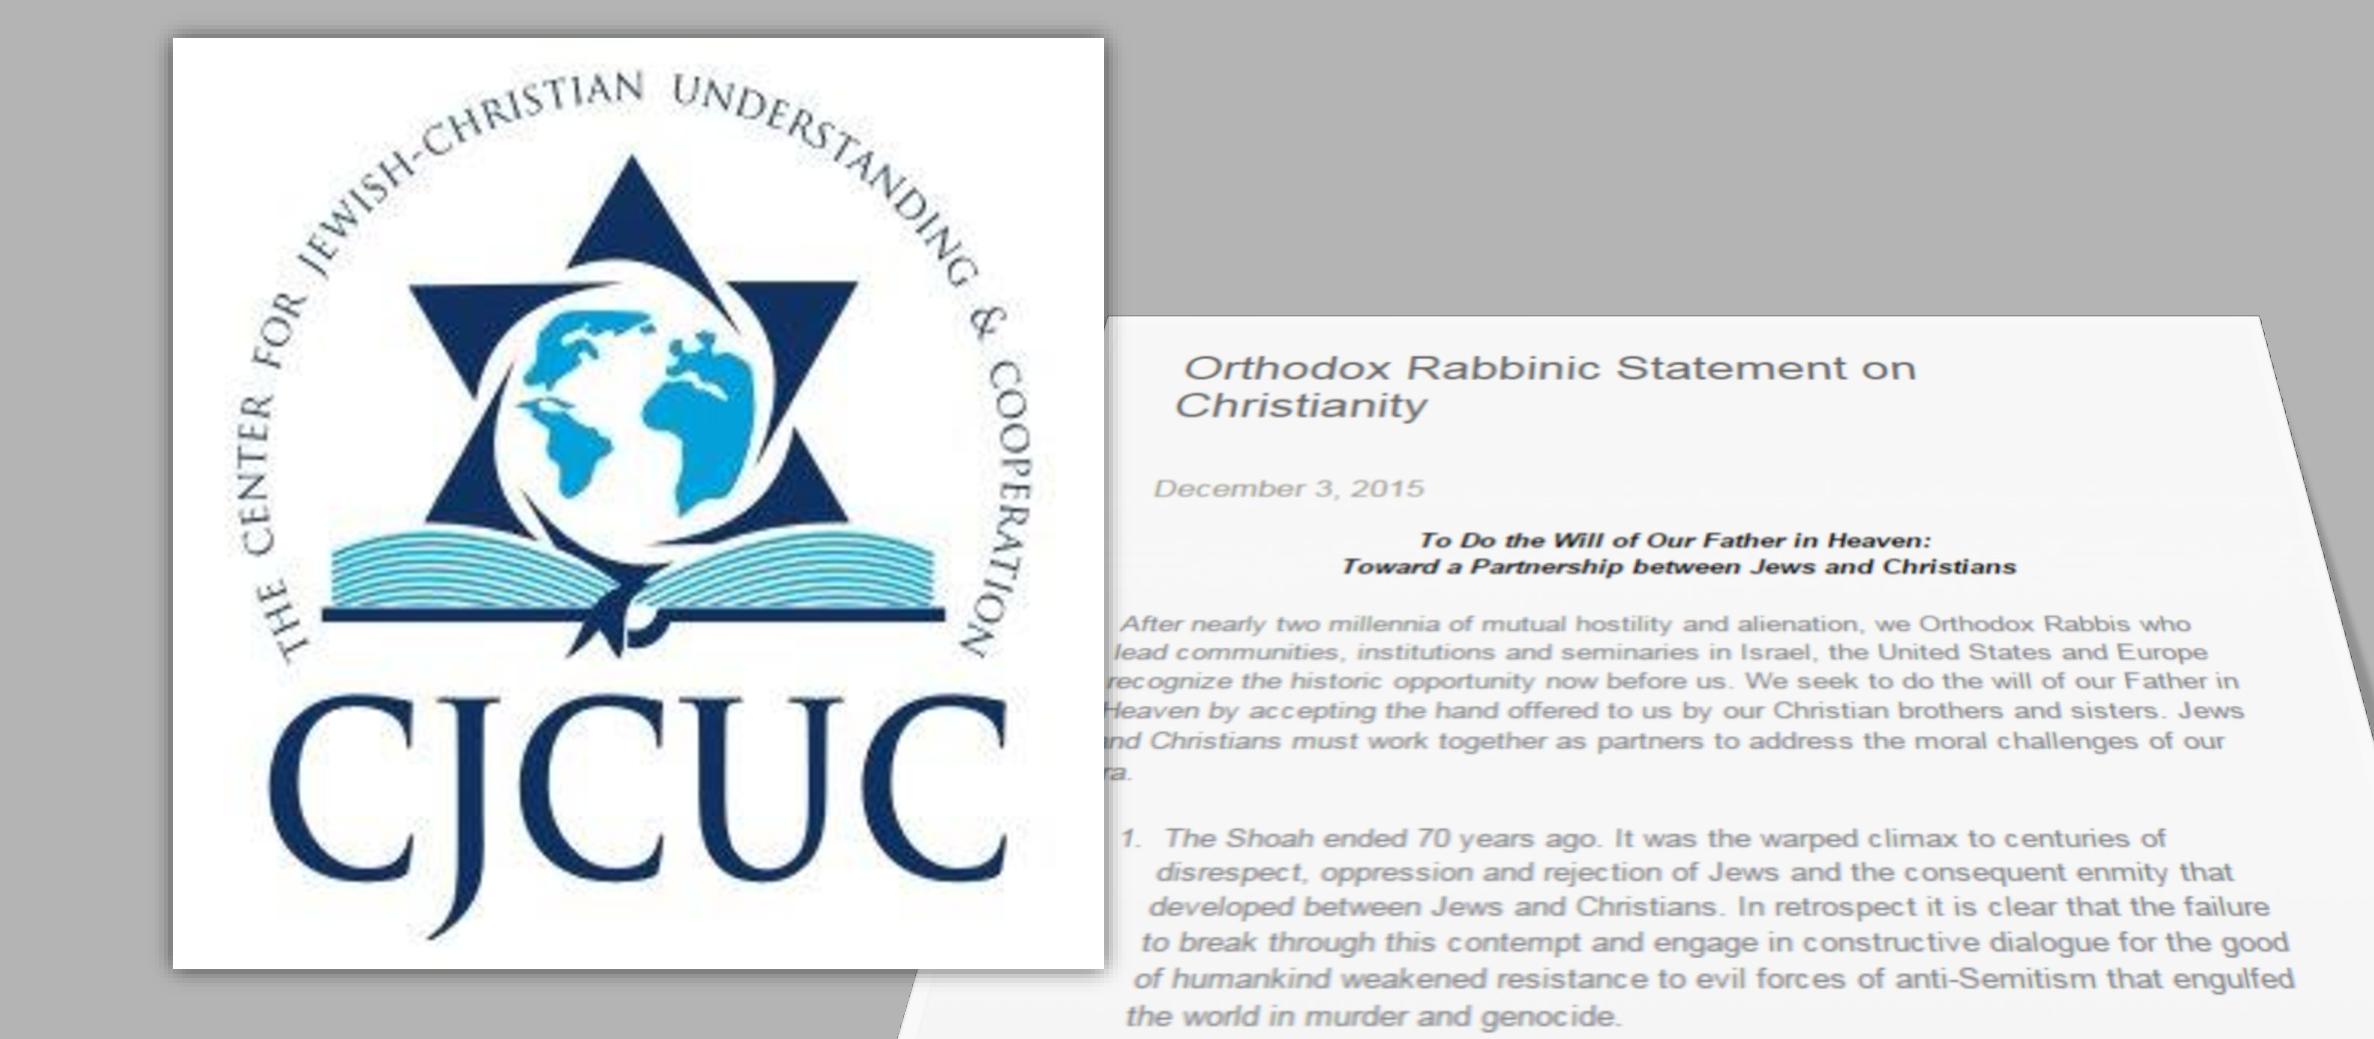 CUFI welcomes historical statement by Orthodox rabbis to Christians